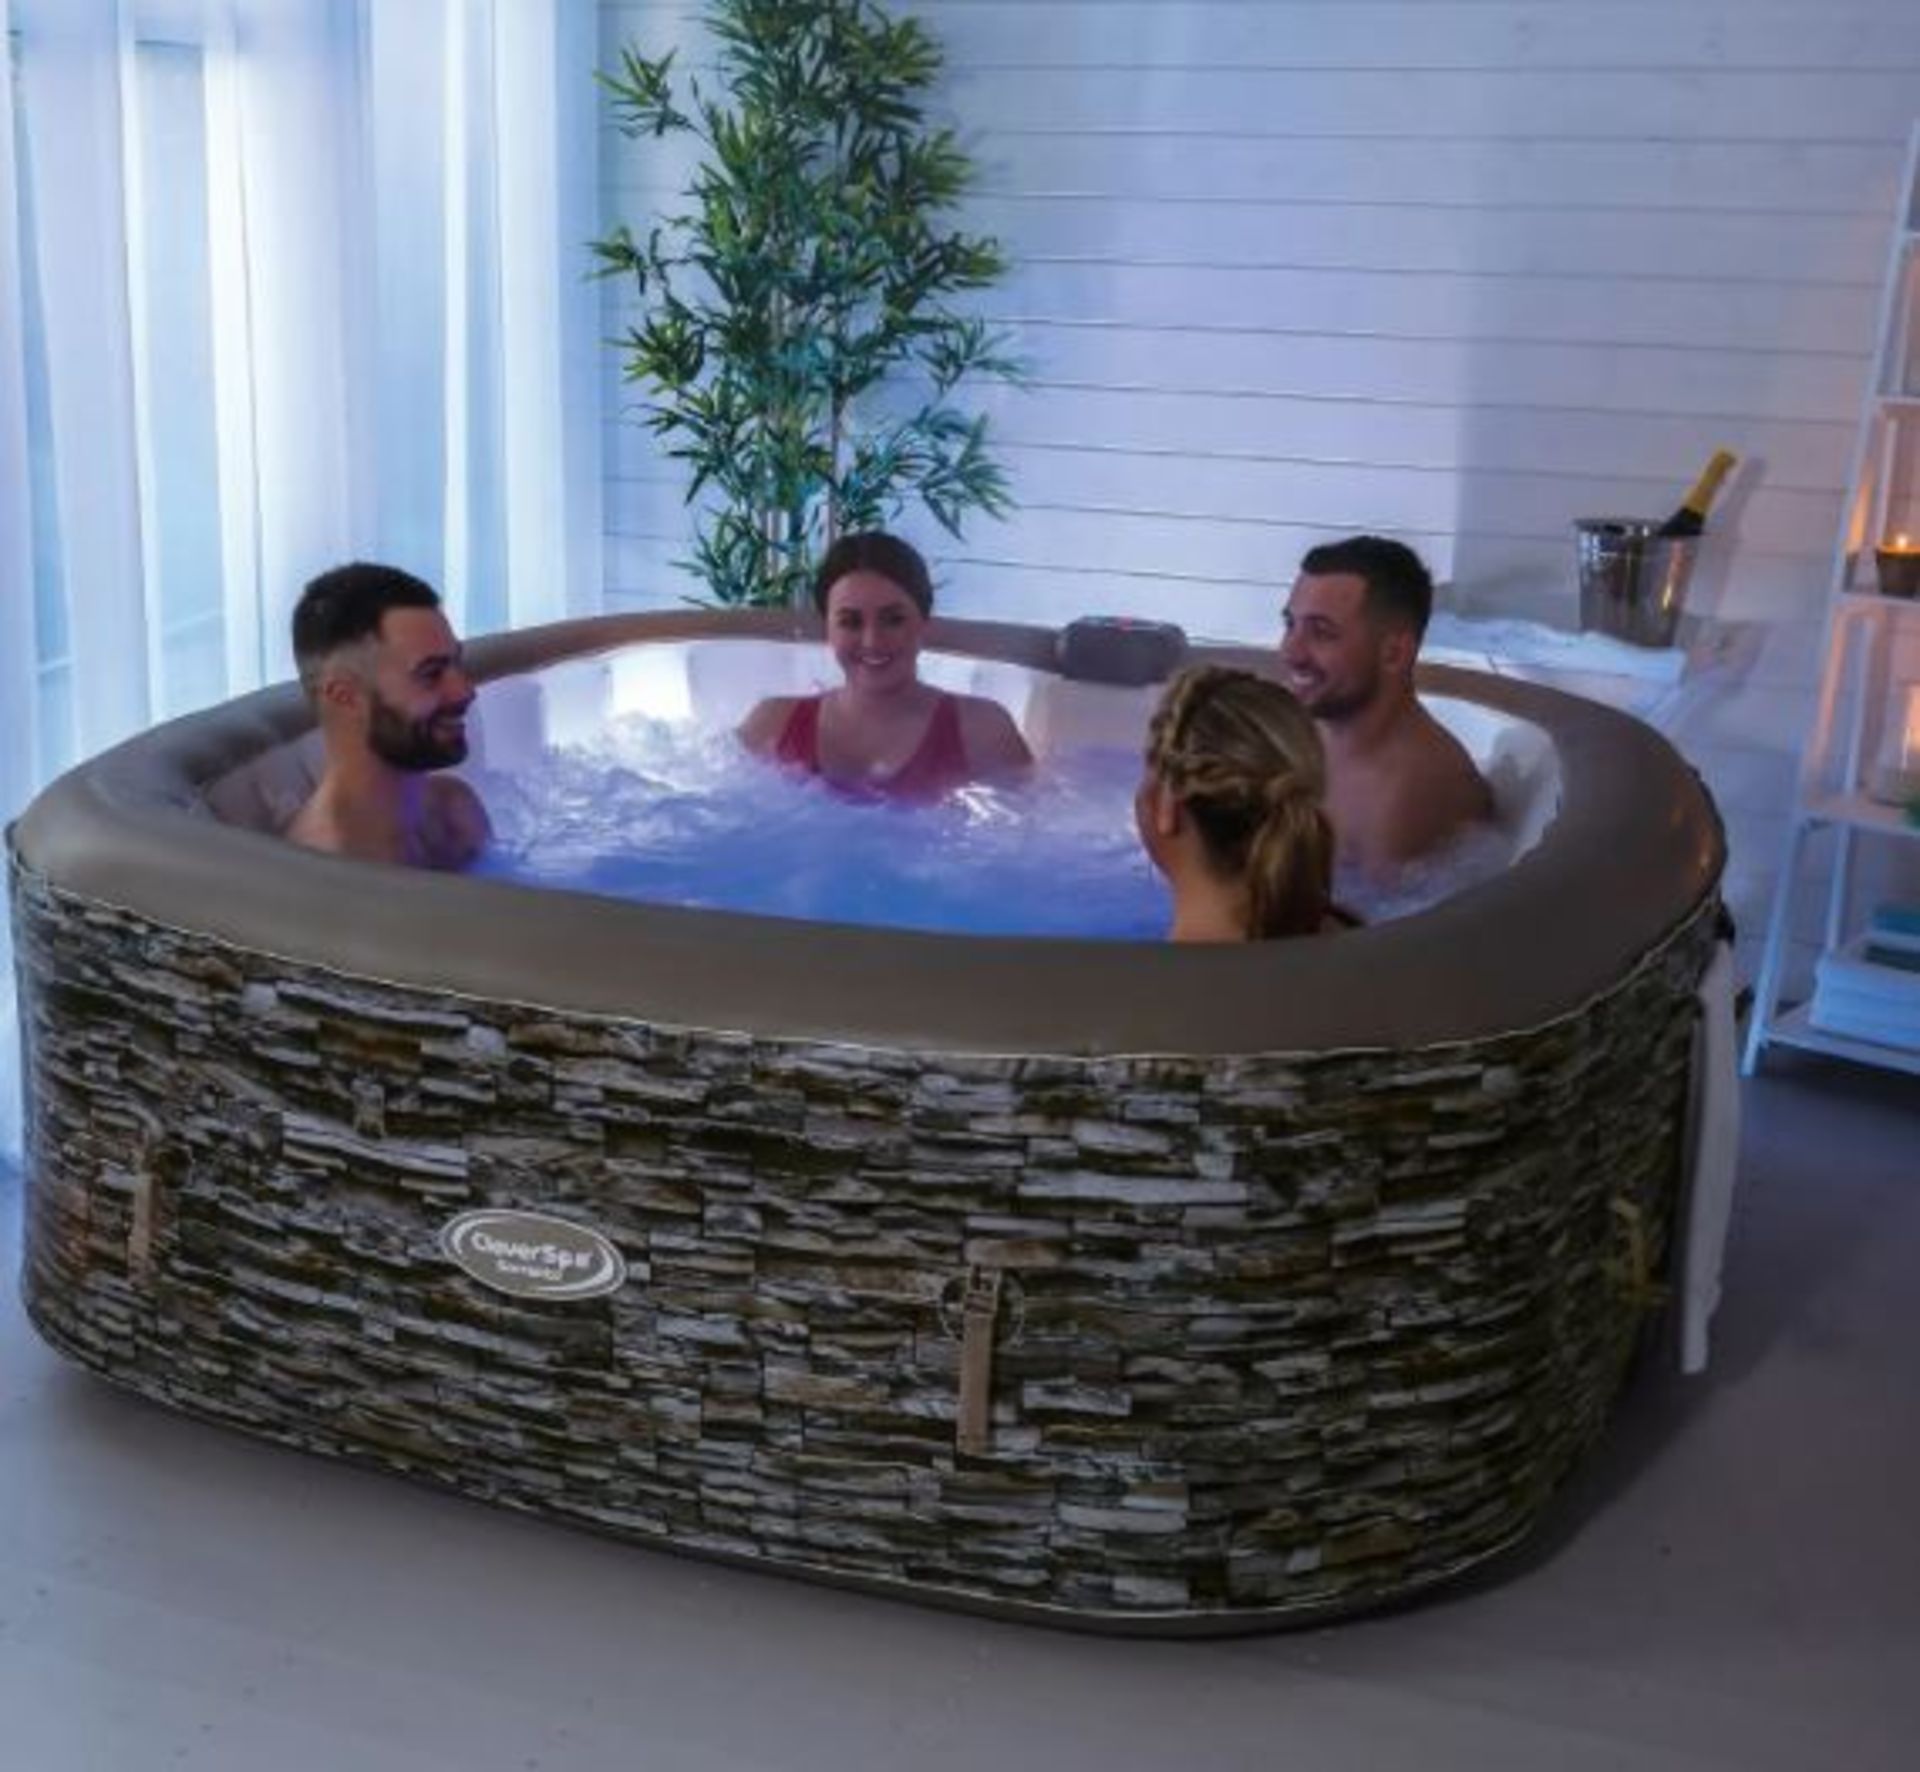 (R7B) 1x CleverSpa Sorrento 6 Person Hot Tub RRP £600. - Image 2 of 7